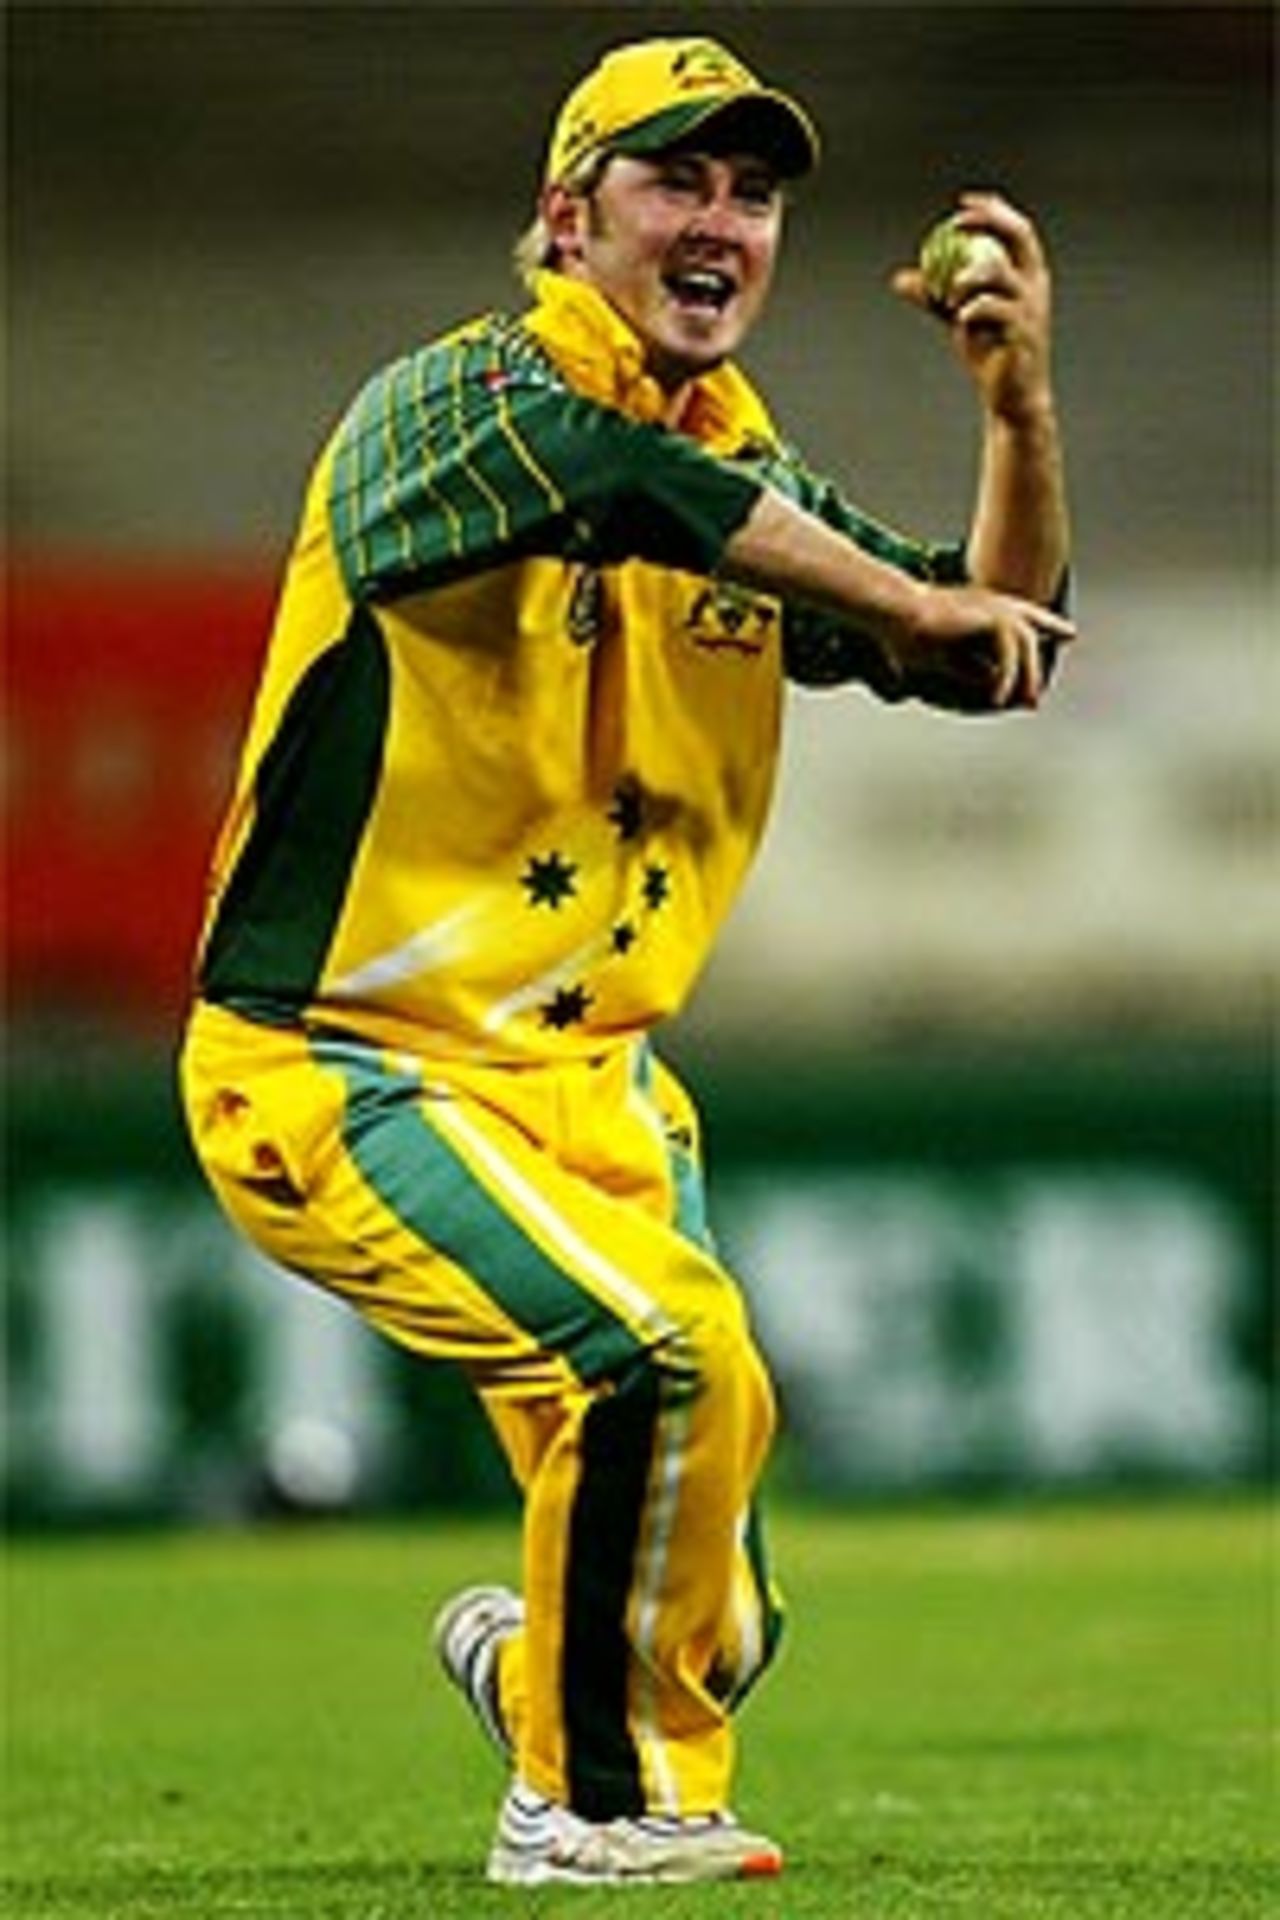 Michael Clarke of Australia celebrates catching Yuvraj Singh of India during the VB Series One Day International between Australia and India at the MCG on January 9, 2004 in Melbourne, Australia.